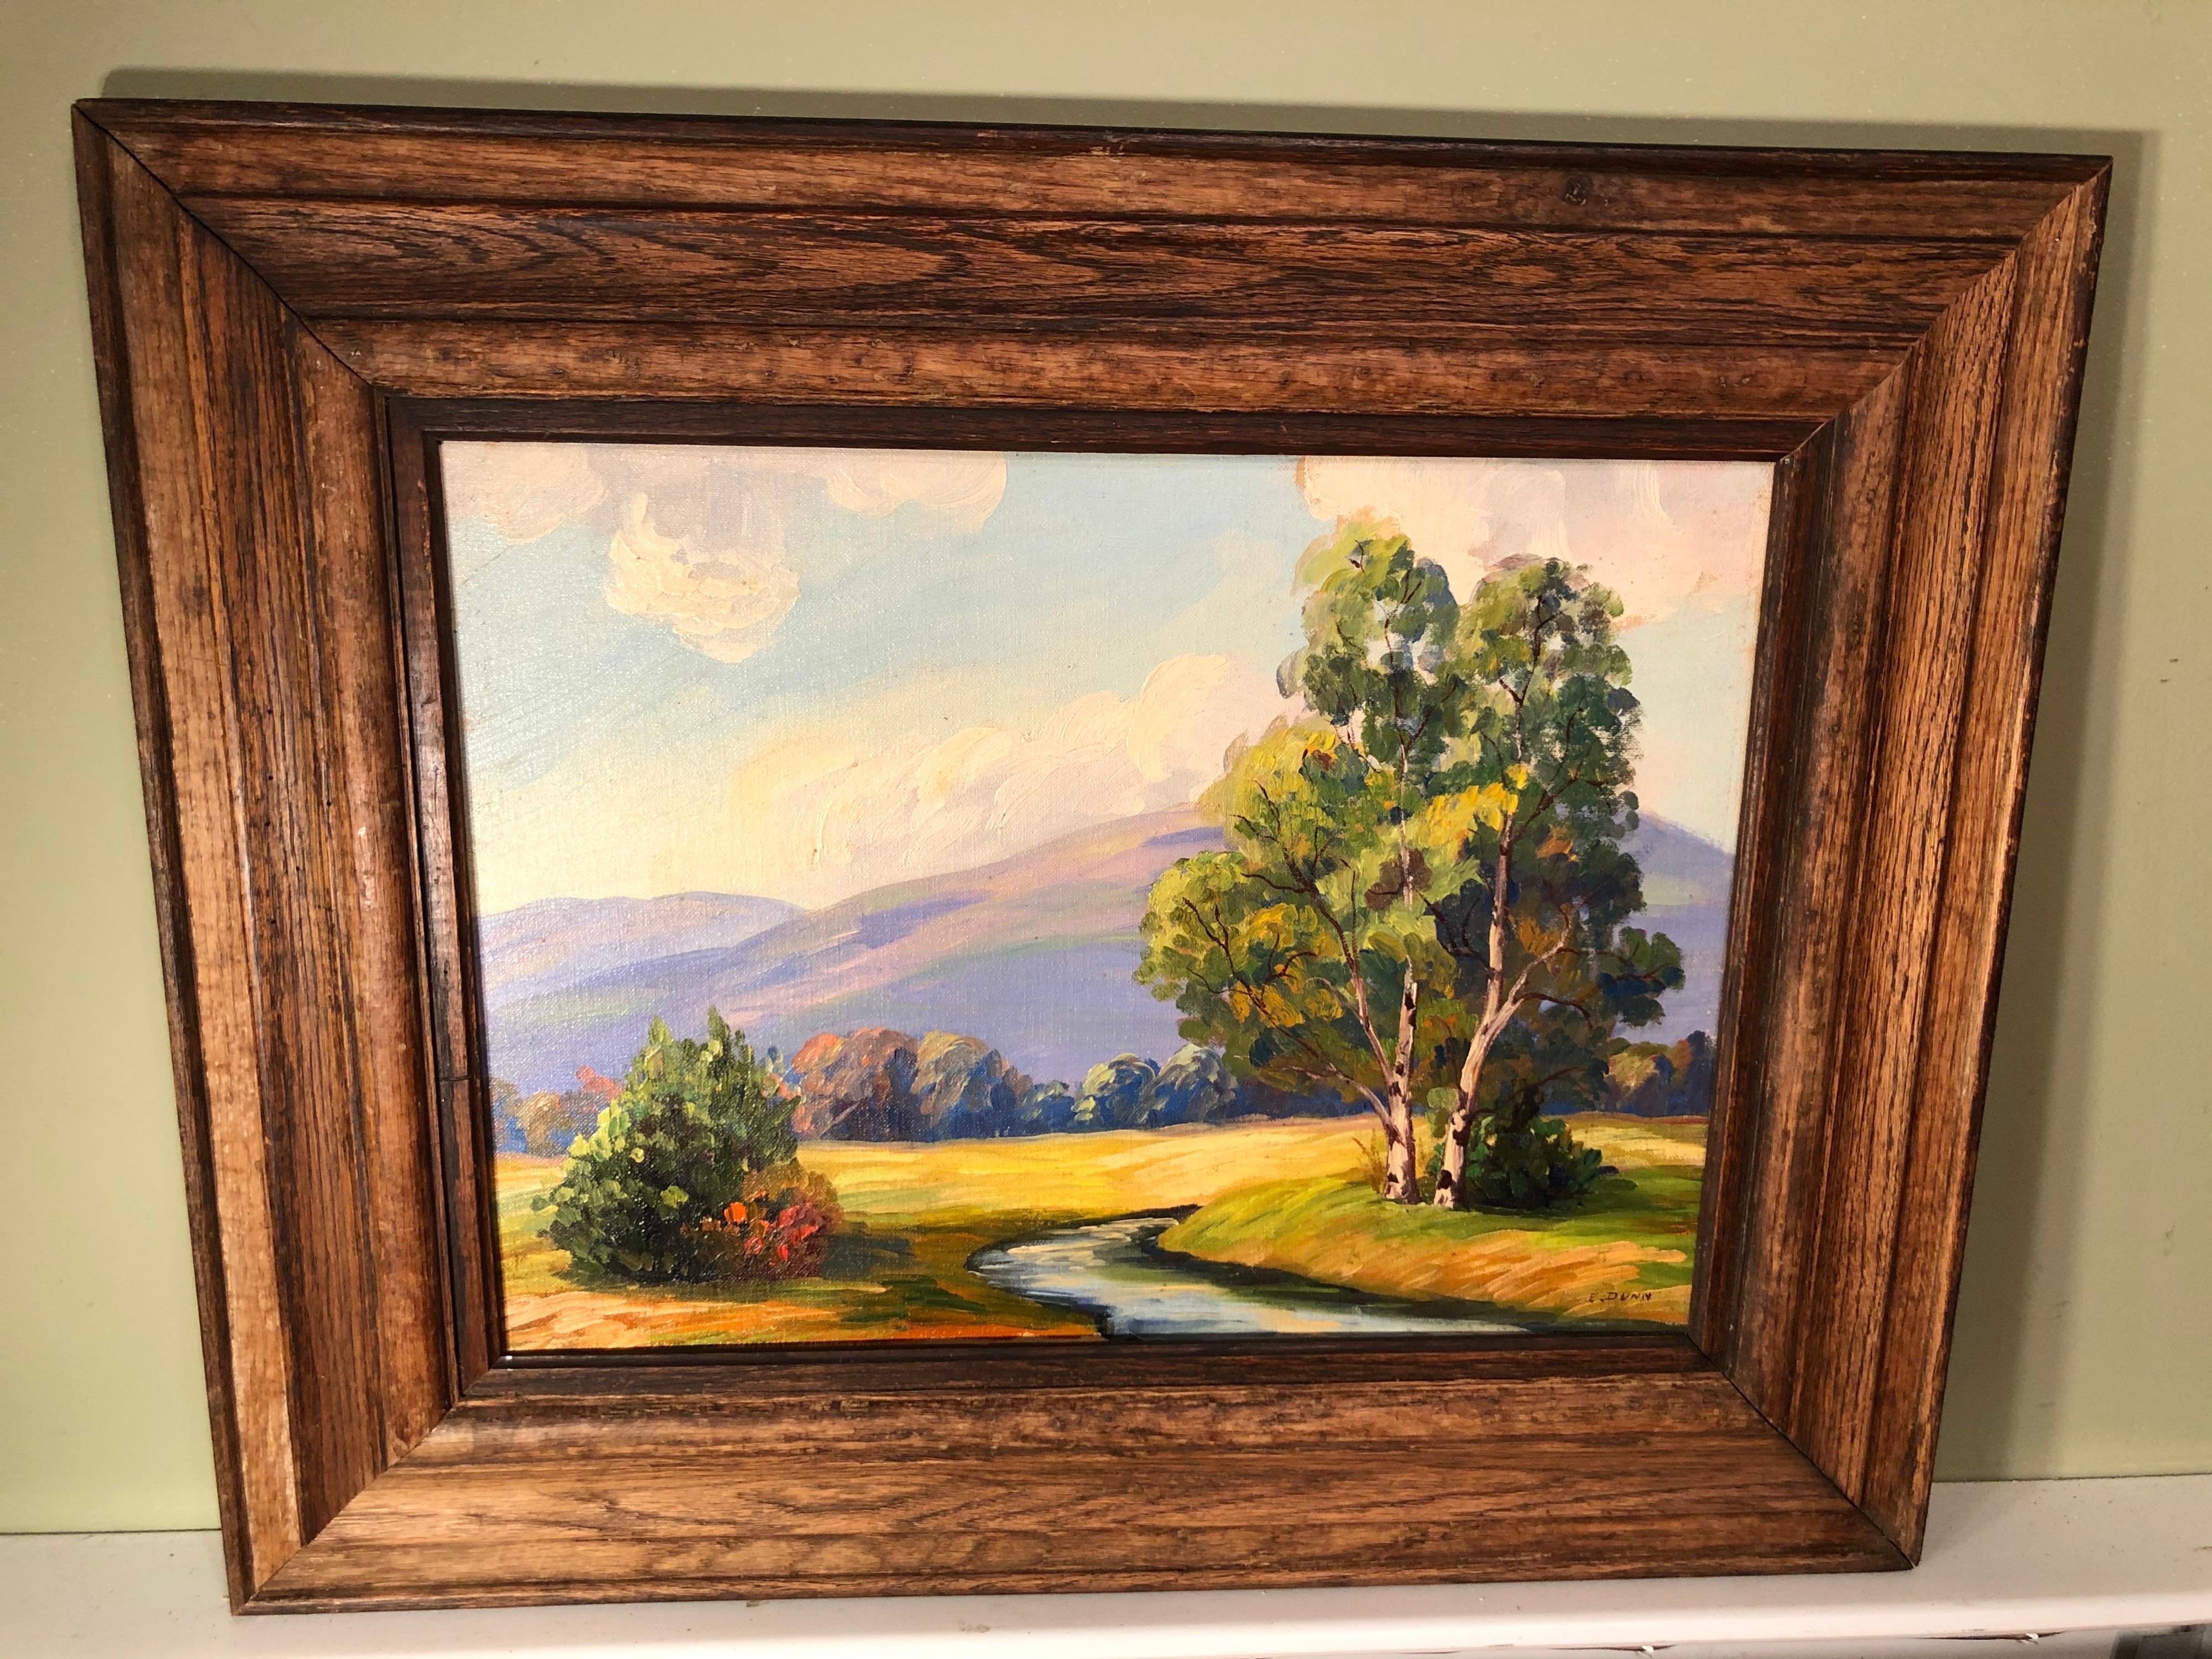 Pastoral scene on canvas by artist Emelene Abbey Dunn
Bucolic field of dreams in a solid wooden oak frame.
Emelene Abbey Dunn (1859-1929)

 Emelene Abbey Dunn.  Born in Rochester on May 26, 1859, Miss Dunn was the daughter of Samuel and Harriet